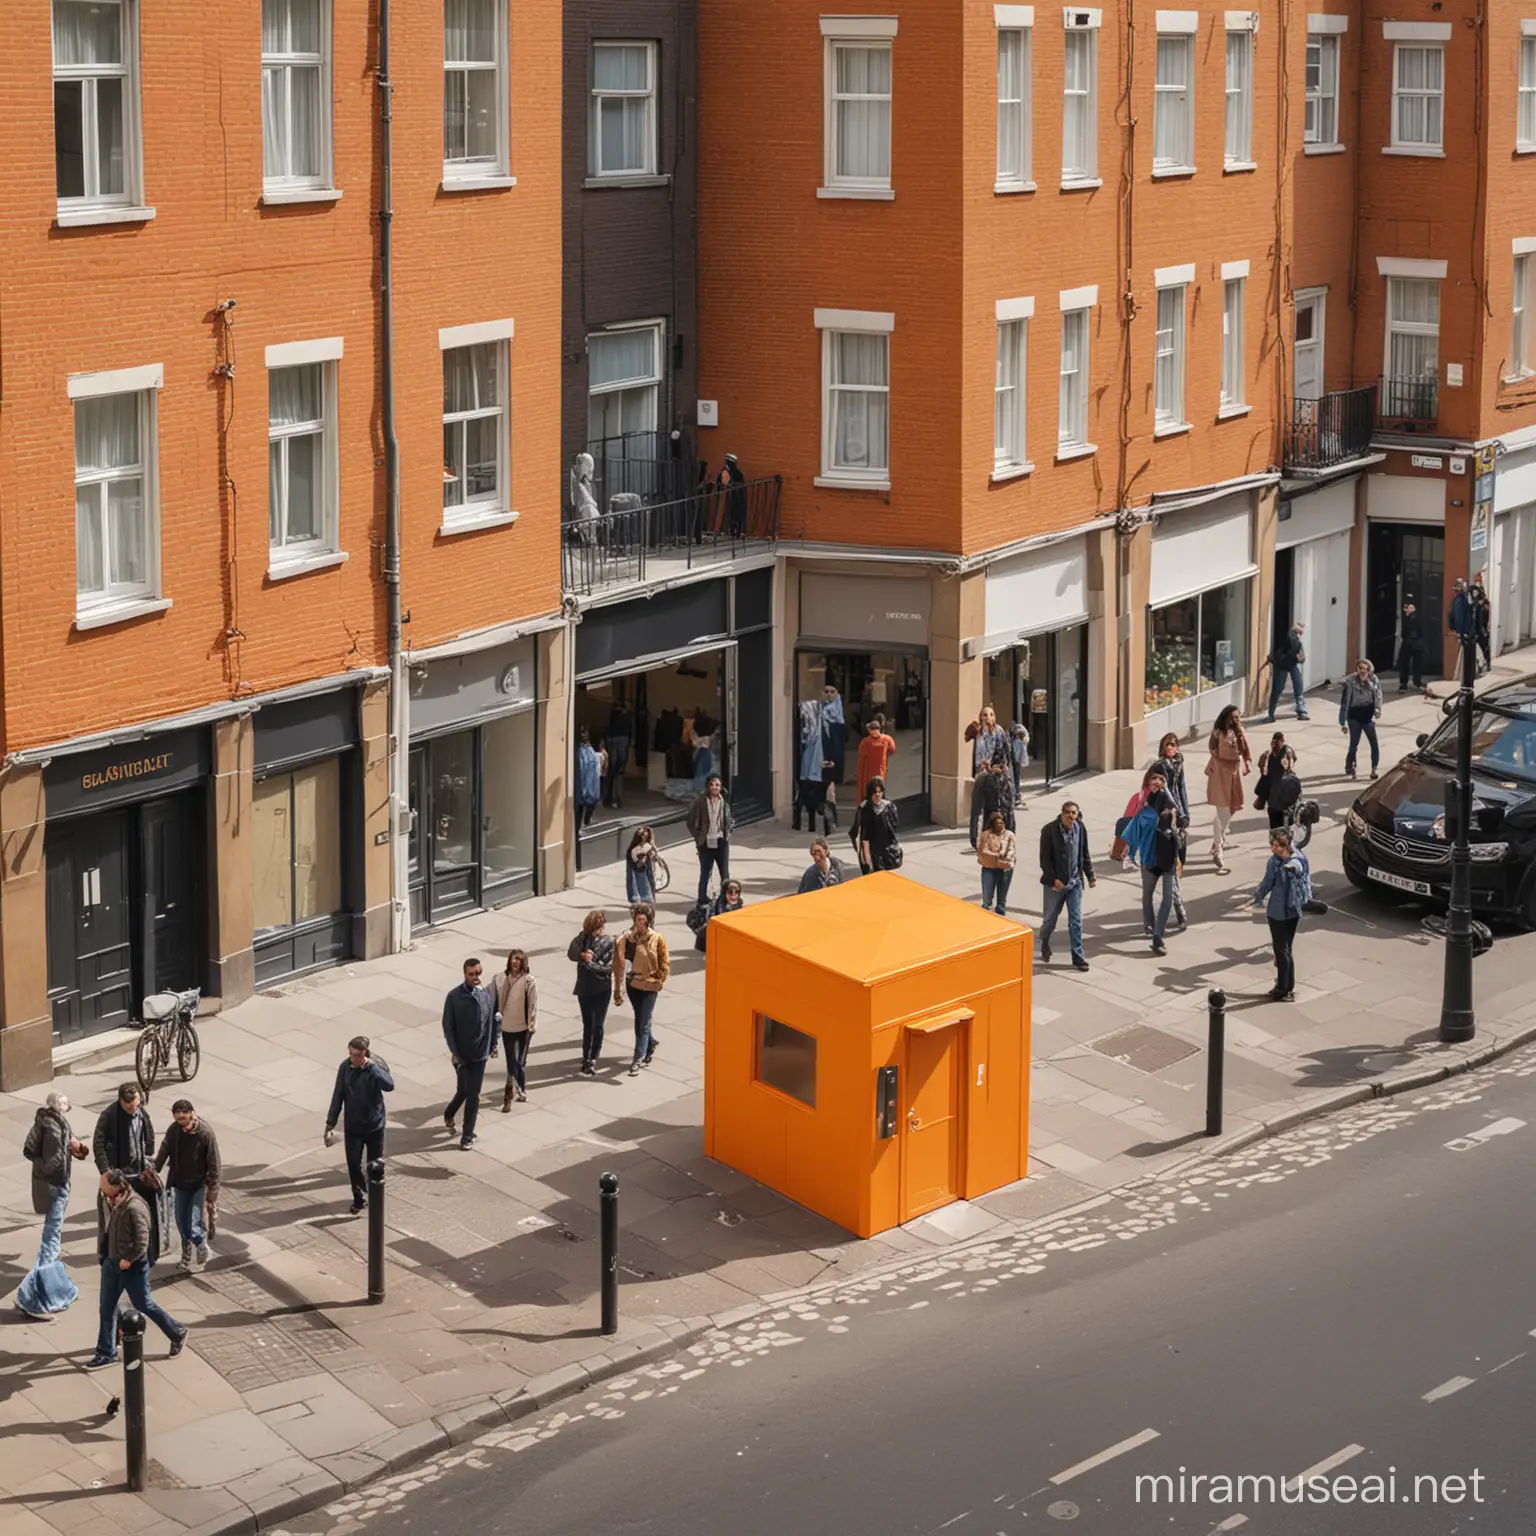 a single room shaped like a orange box has a door and standing on a crowd street